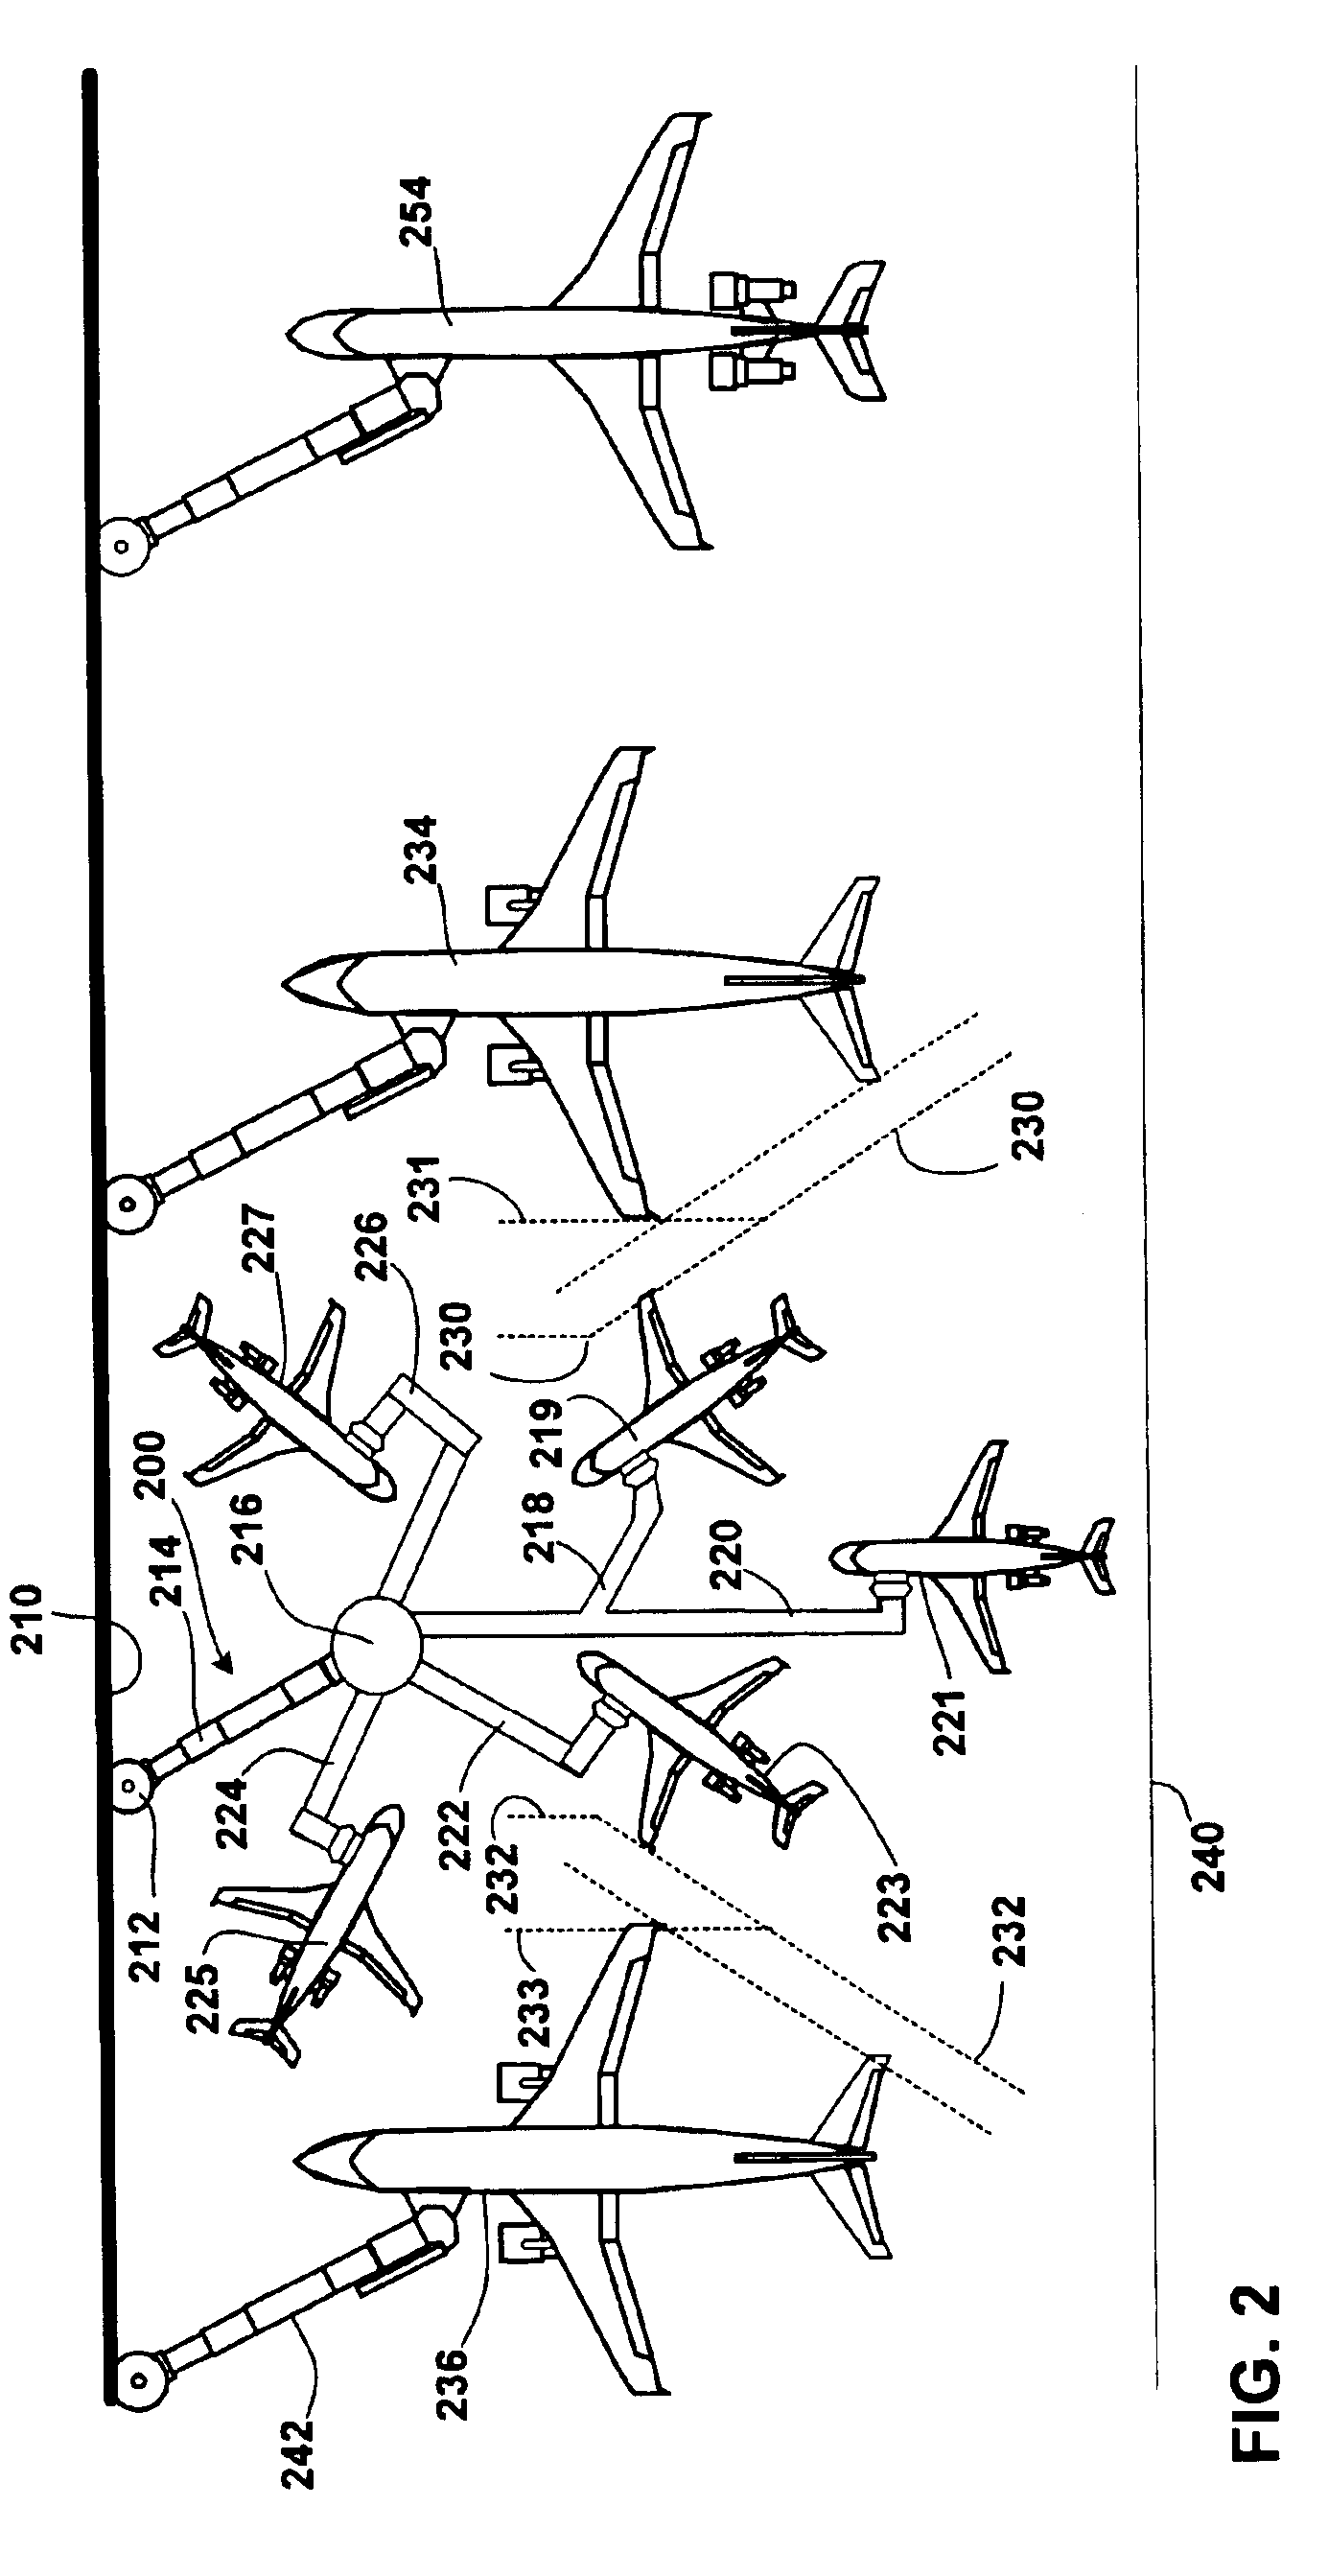 Interstitial regional aircraft boarding piers, and methods of using same